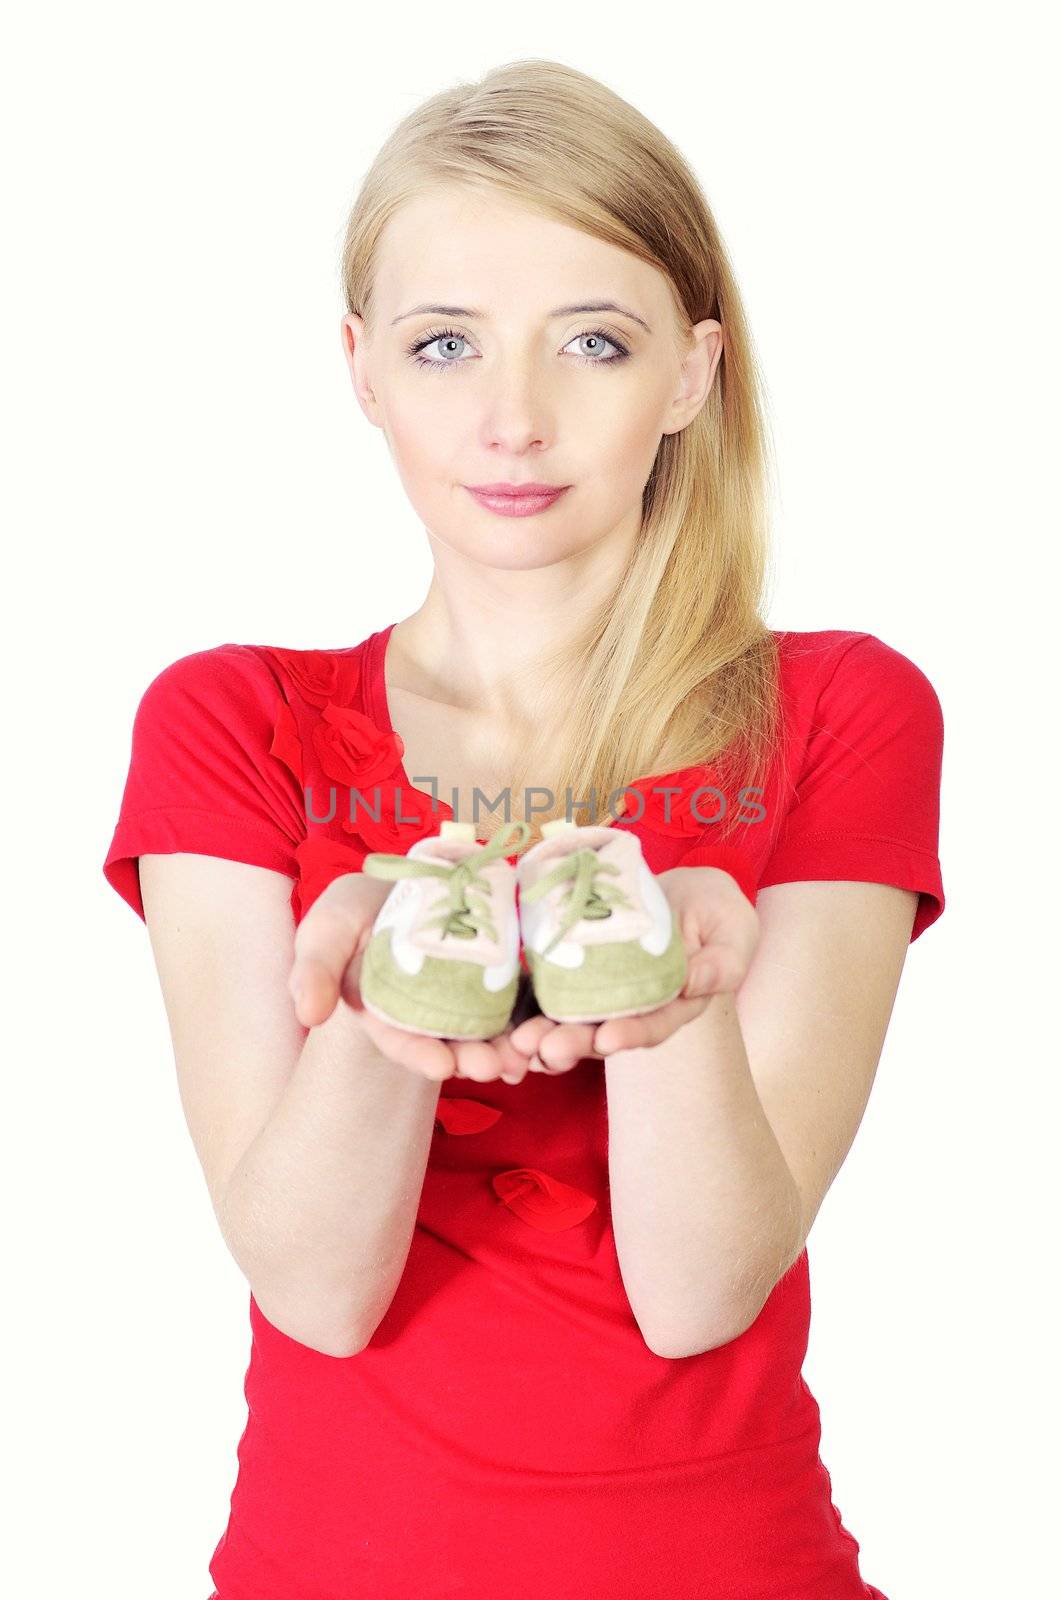 Woman holding baby shoes showing she is pregnant